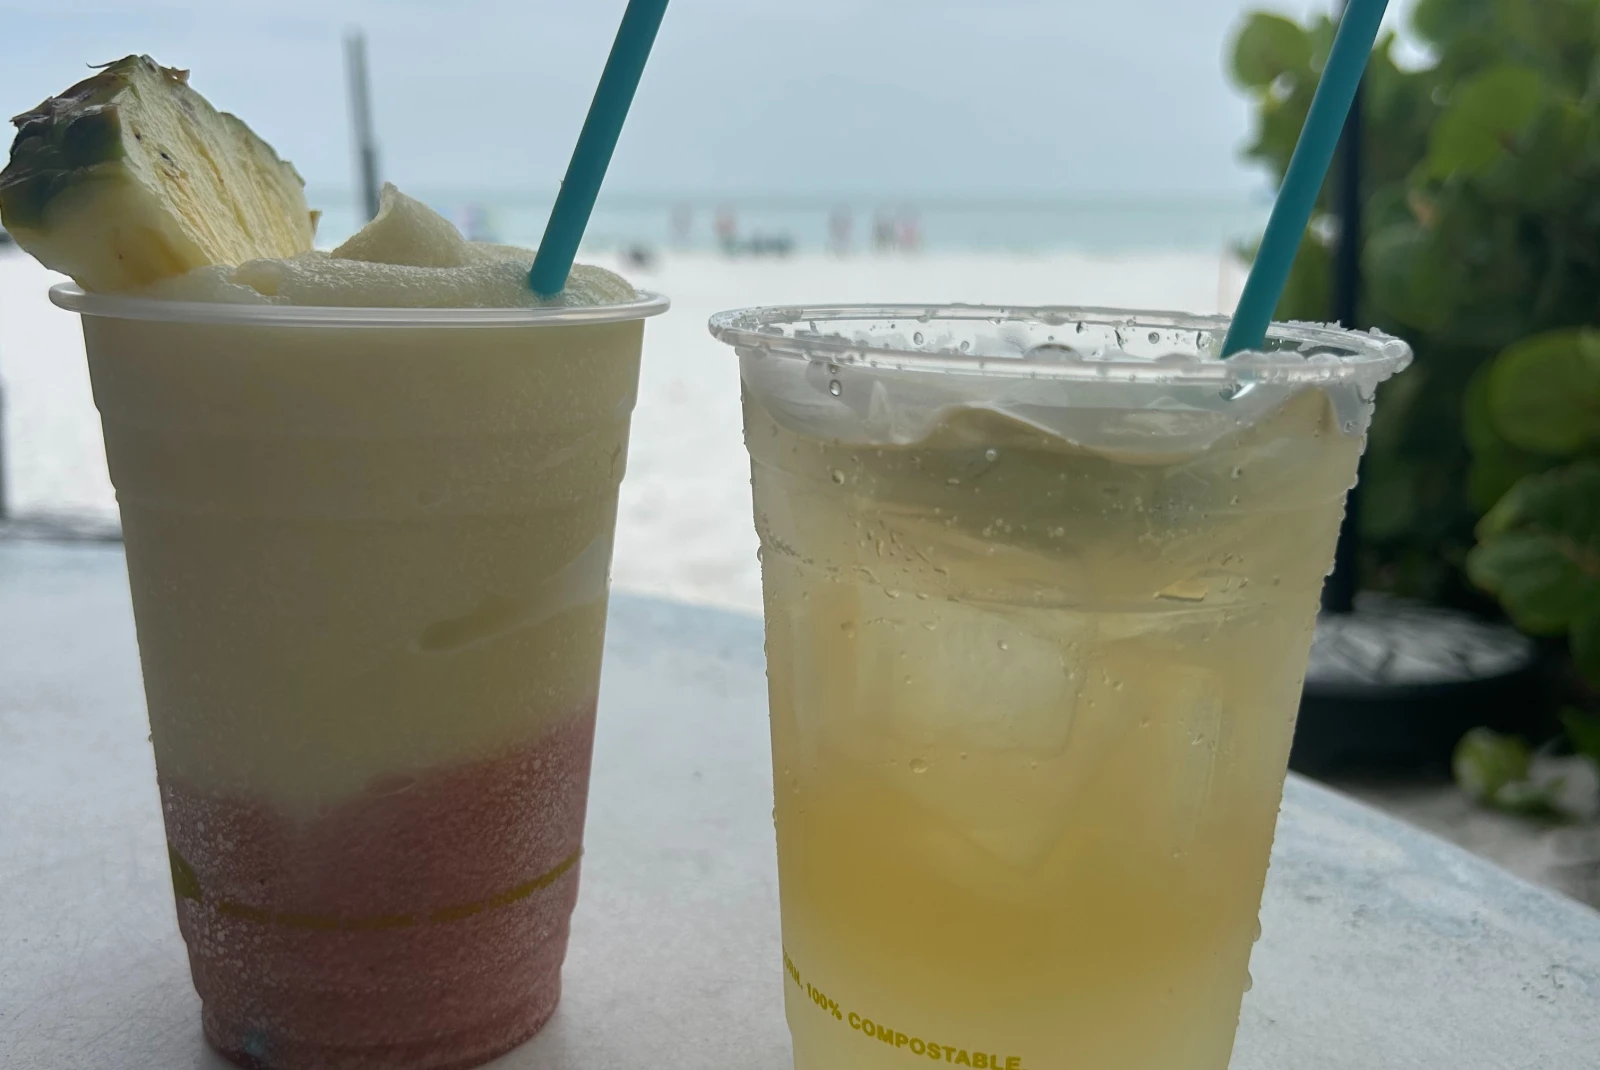 Sipping some cocktails while enjoying the nice beach view.